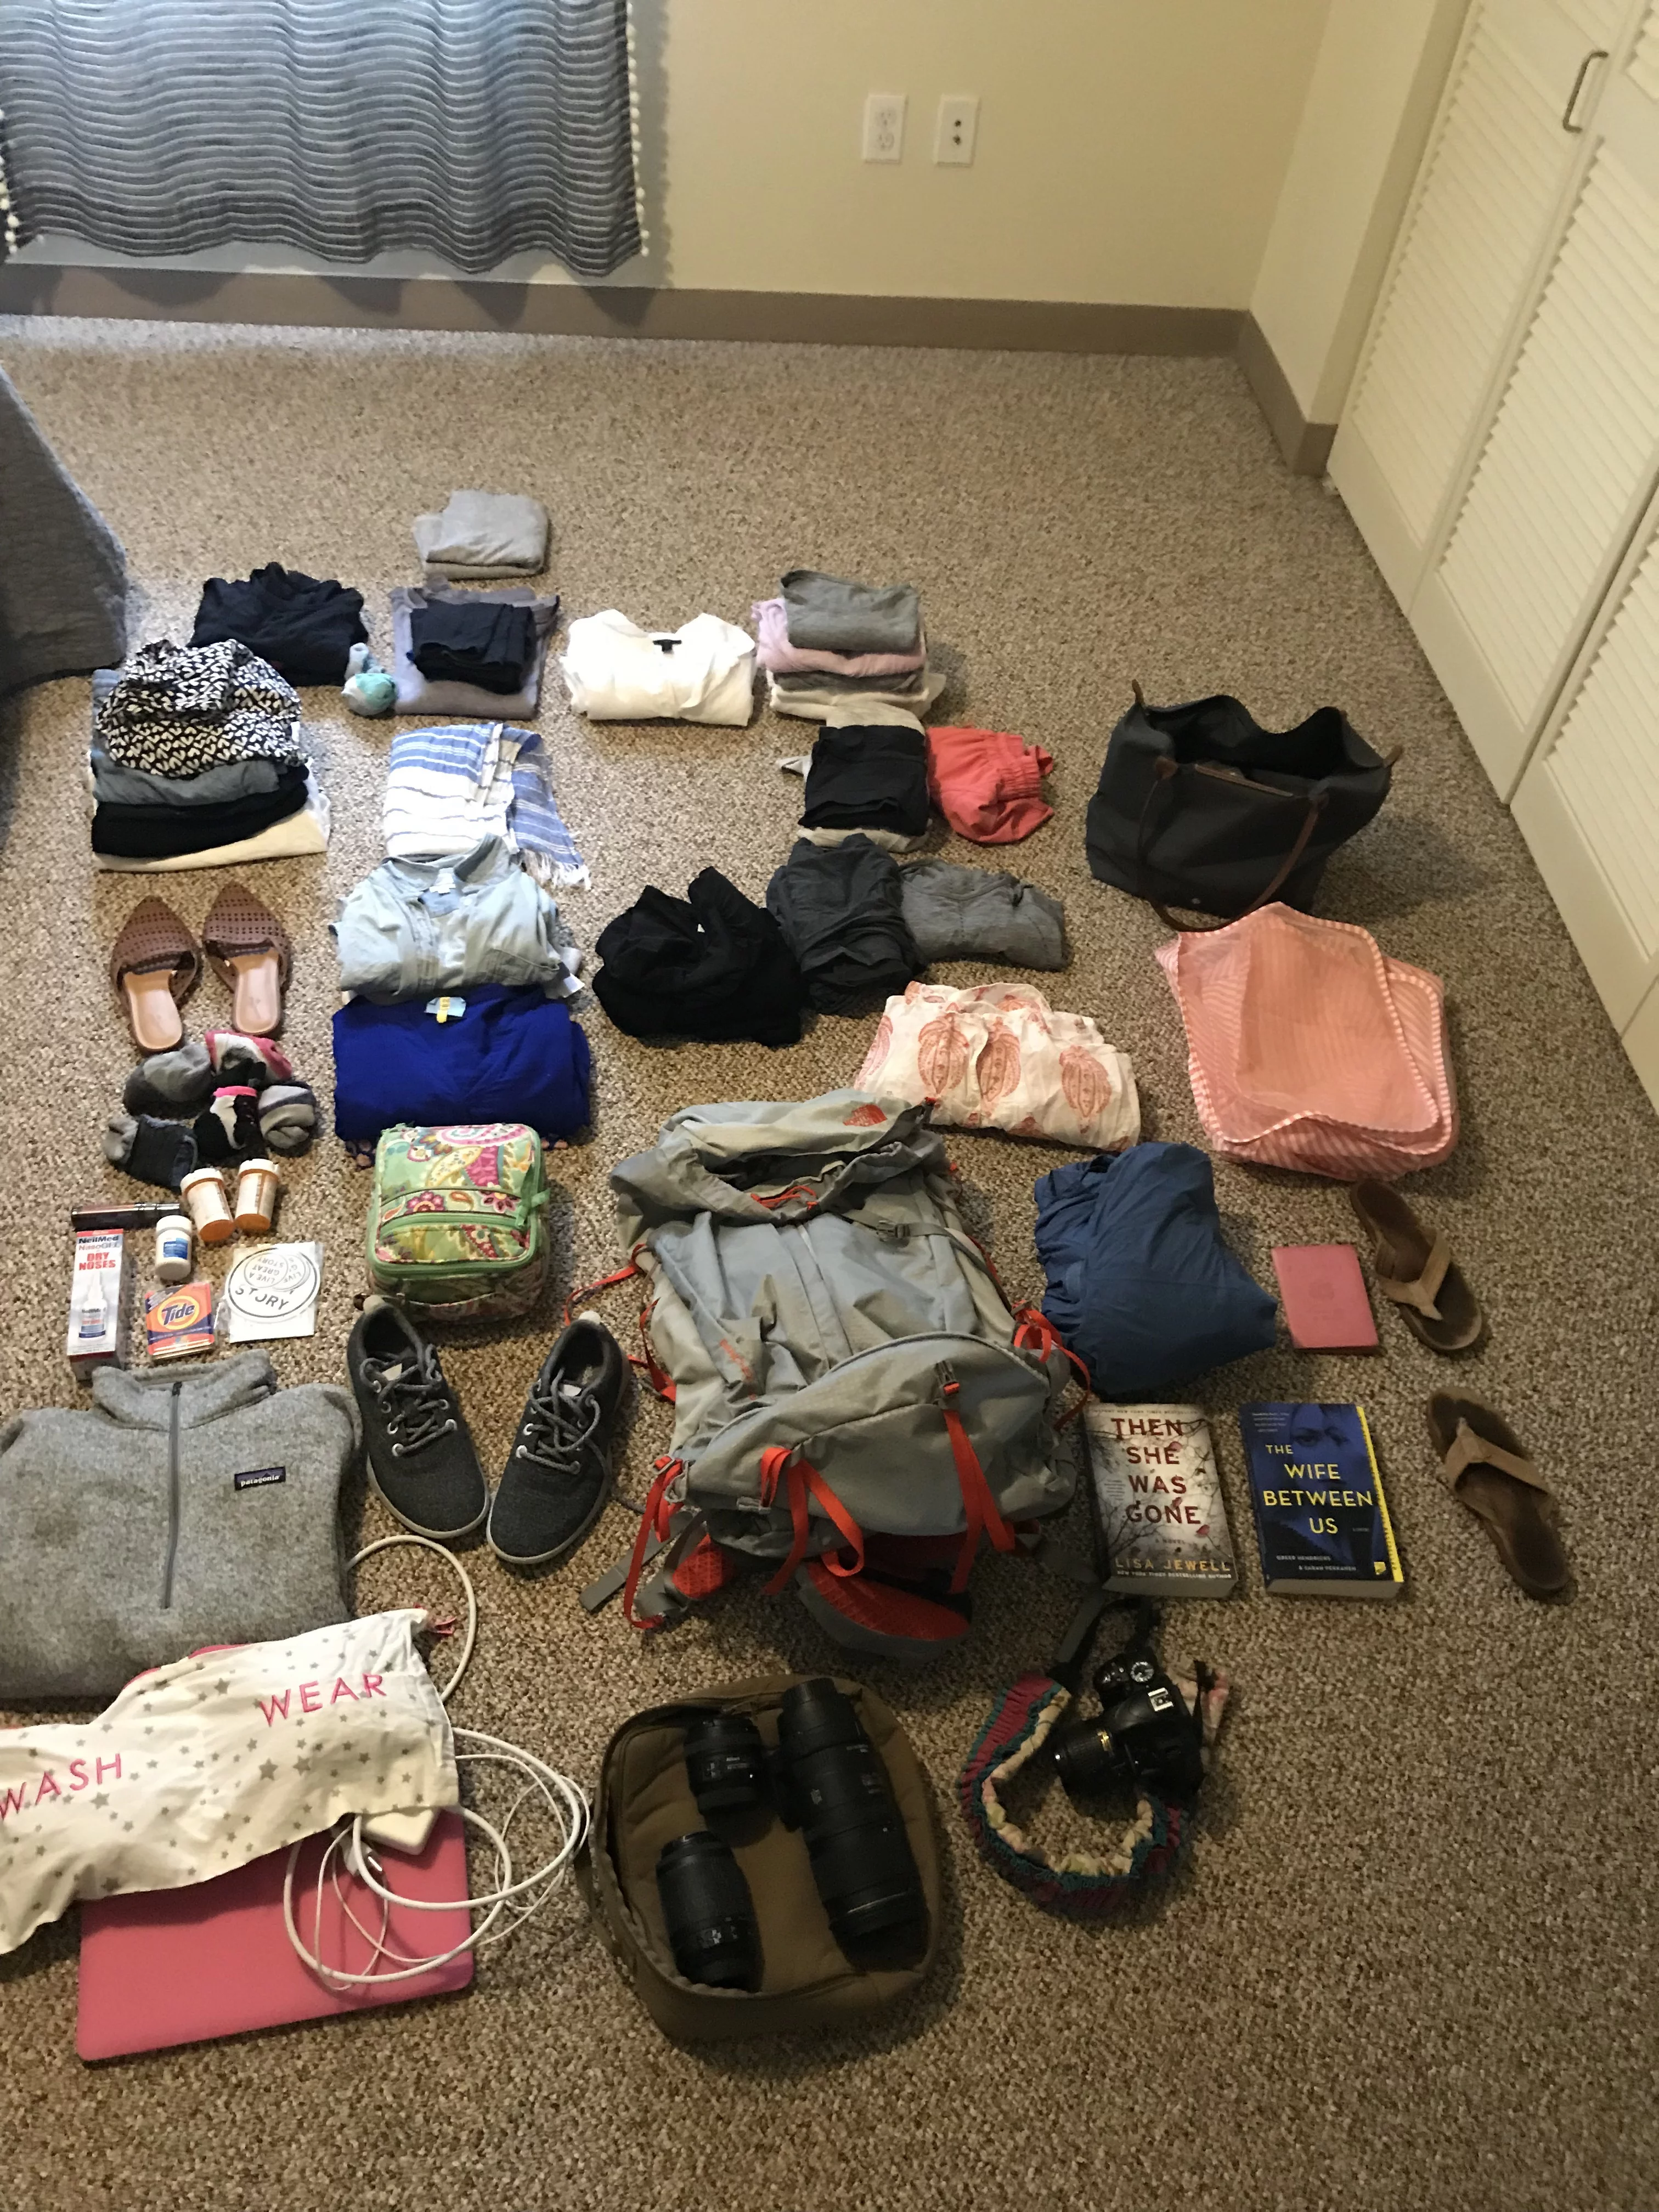 MOROCCO PACKING LIST - A full packing list for traveling through Morocco from Marrakech to the Sahara in March! | Morocco Packing List - Packing List For Morocco In March - What to pack for Morocco - What to pack for a trip to Morocco - Tips for traveling to Morocco - Morocco Packing in a backpack - How to pack in a backpack for two weeks - North Face Packs - Packing Cubes - Best Packing Cubes - How to use packing cubes - #Morocco #Travel #PackingList